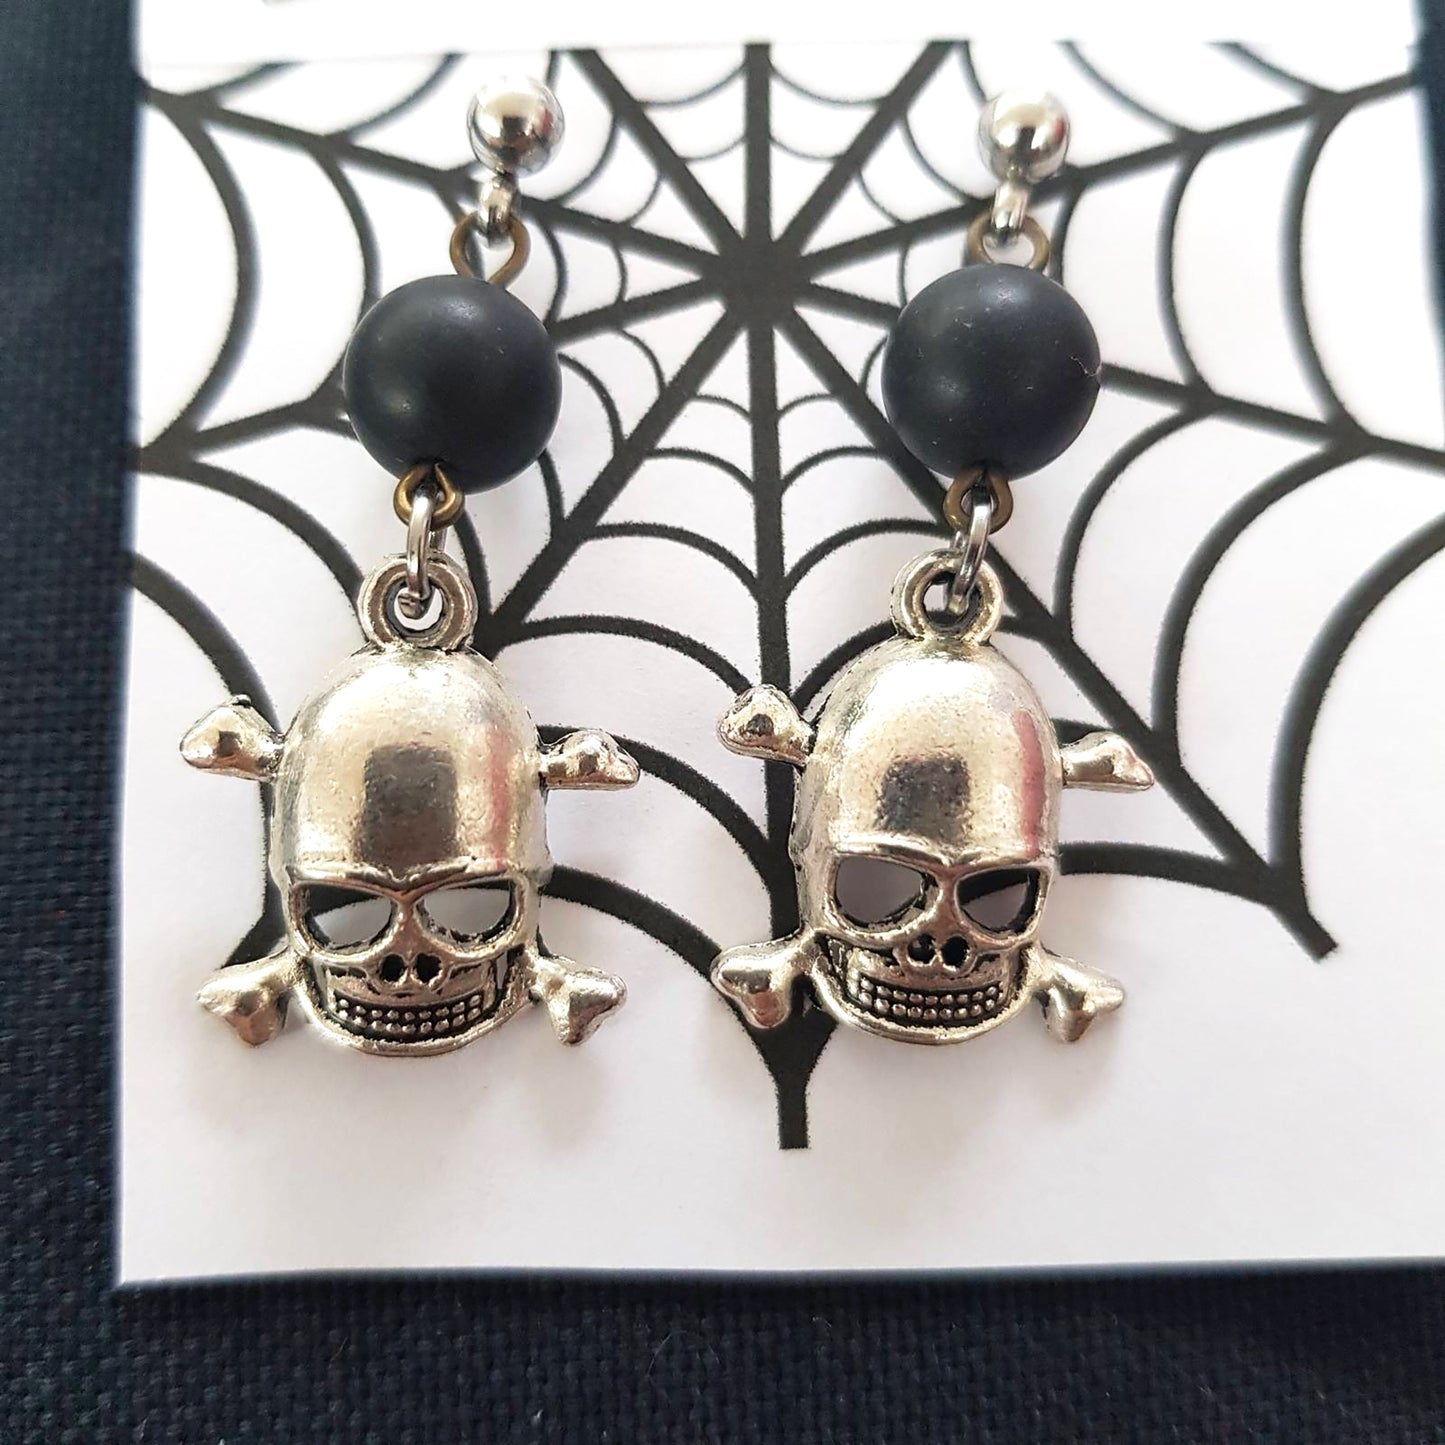 "Dare to be Different: Rebel Skull and Onyx Earrings Make a Statement"